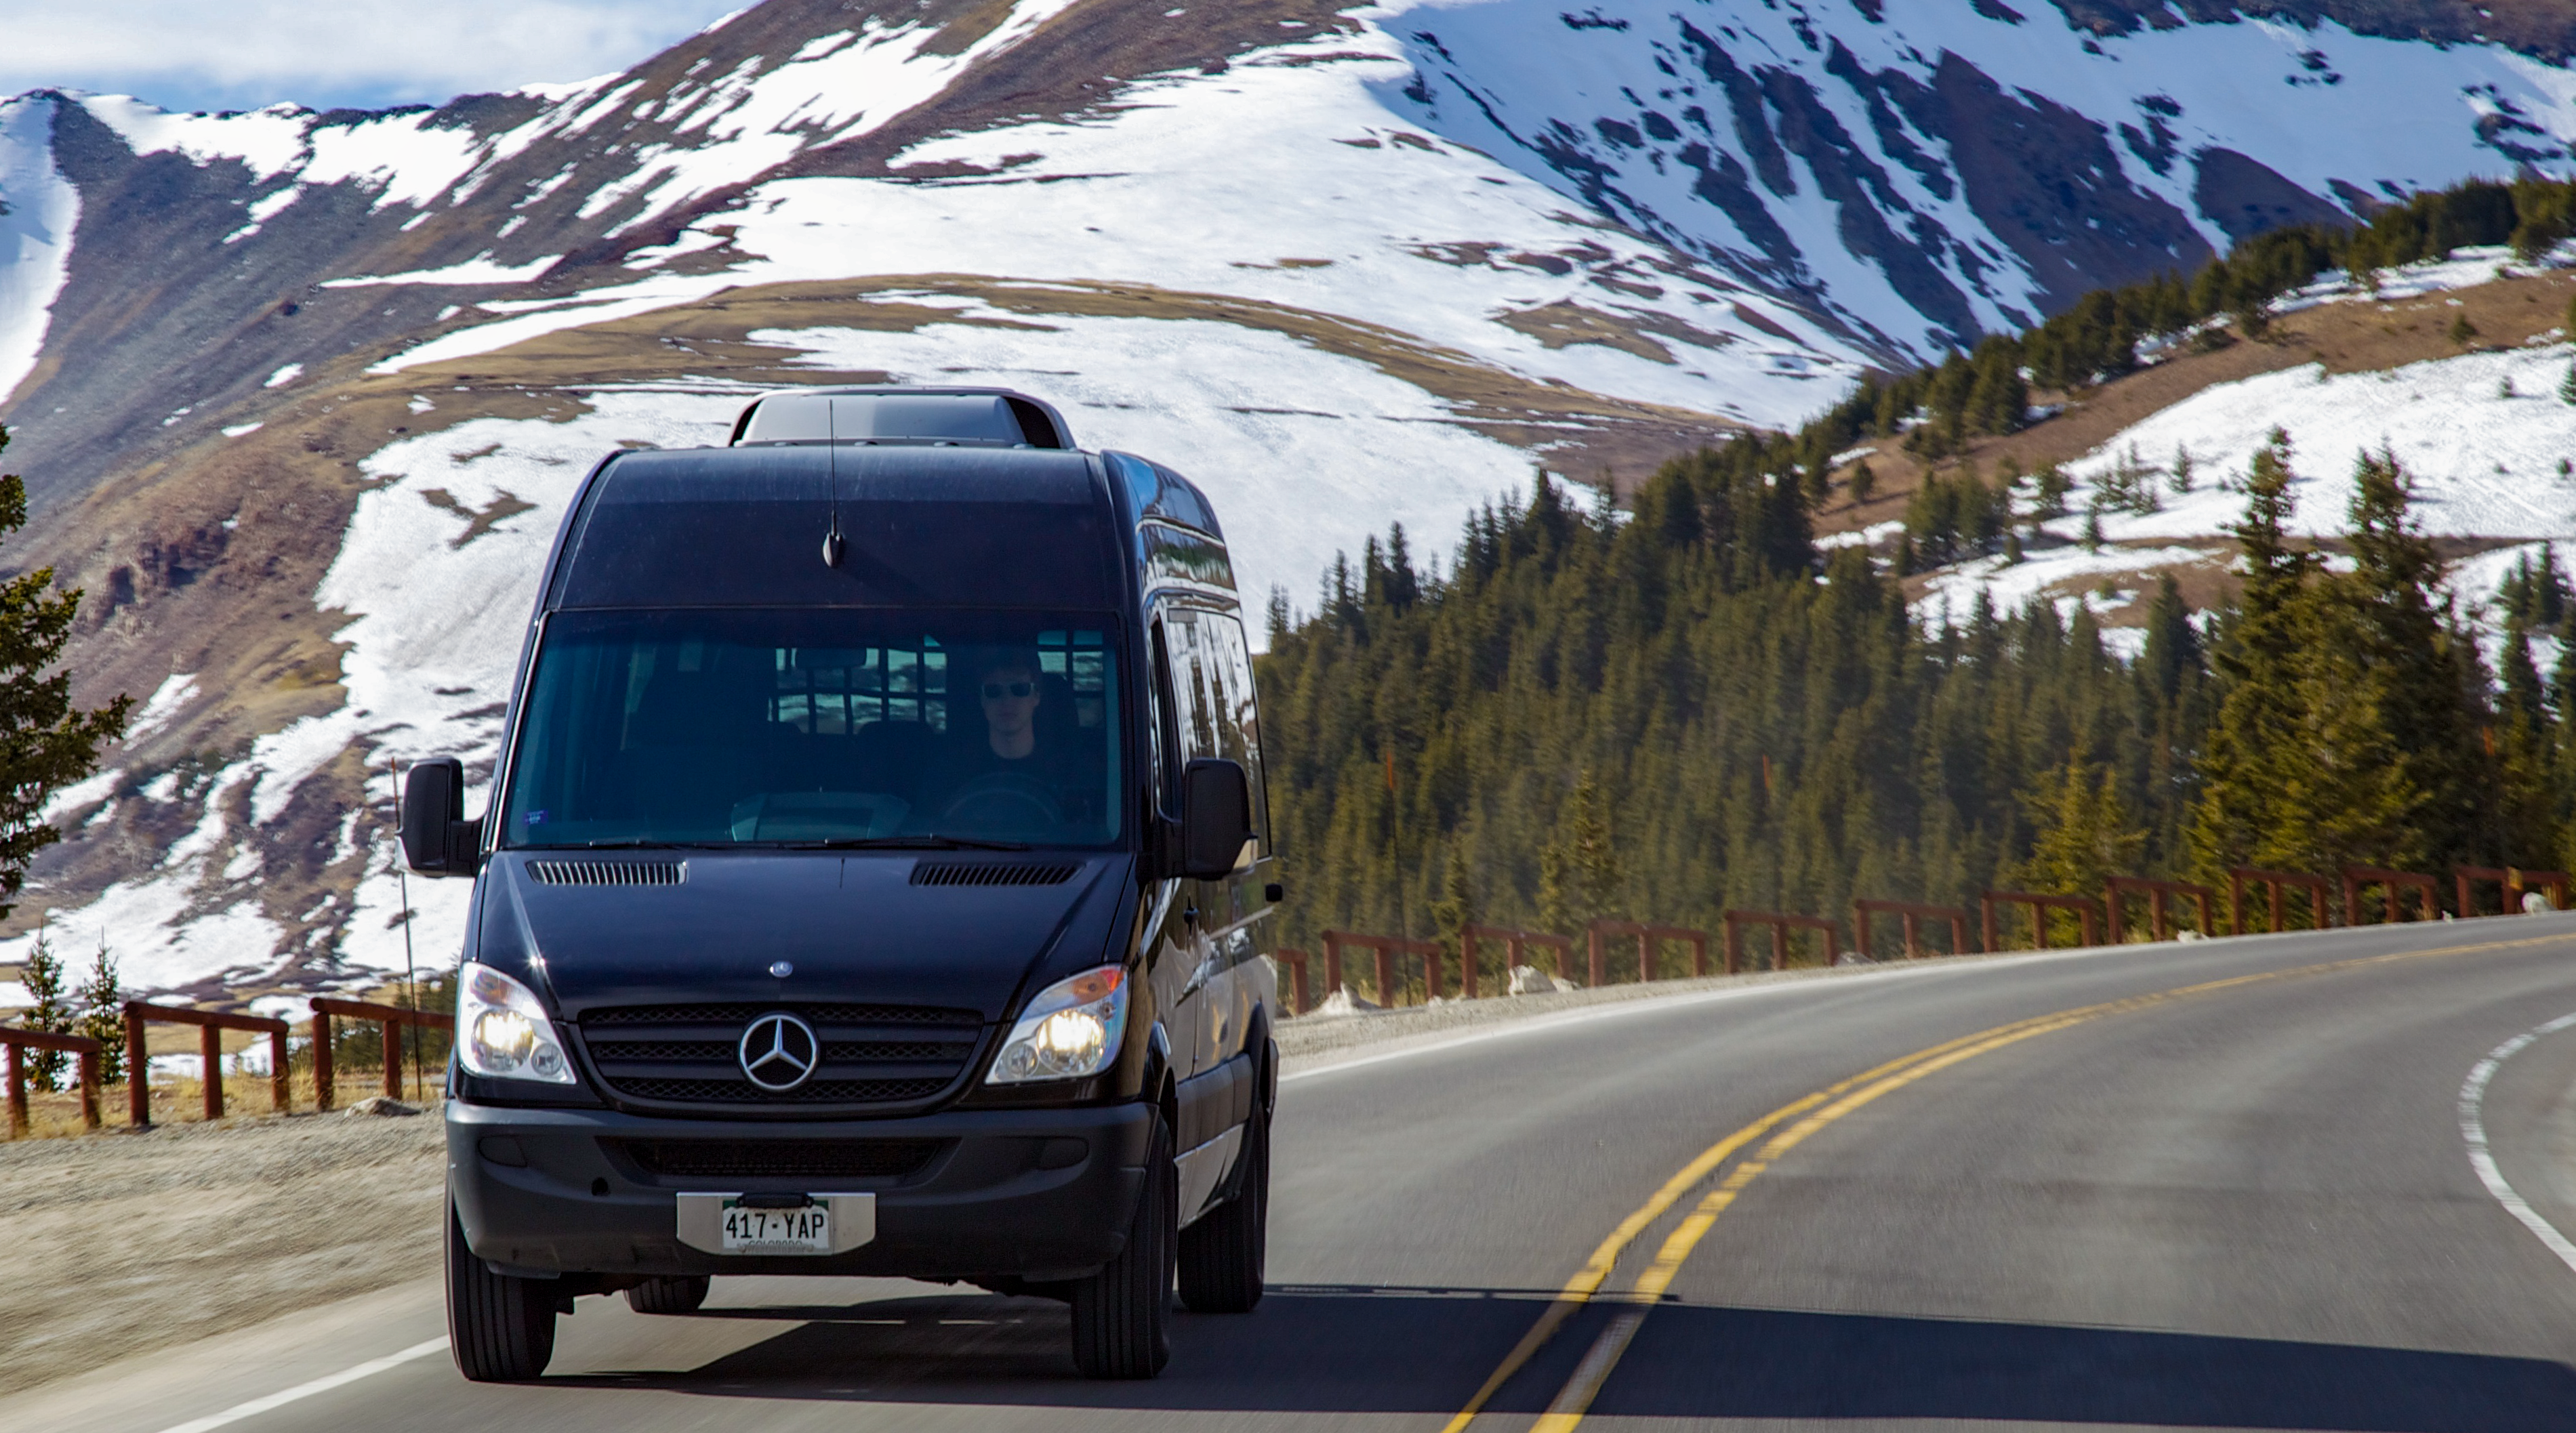 A black sprinter van driving on a road with mountains in the background